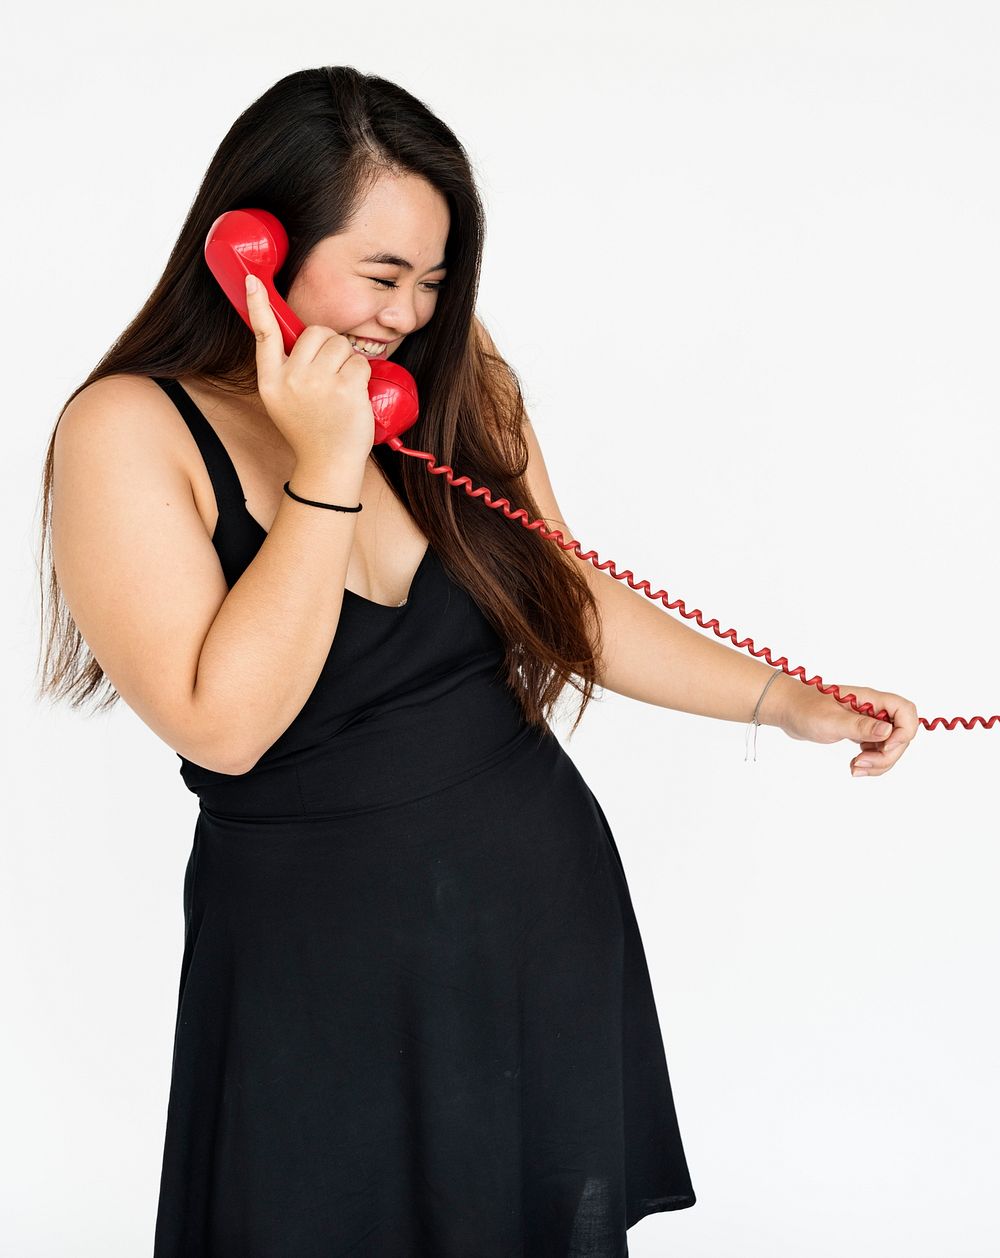 Studio portrait of a young asian woman on the phone